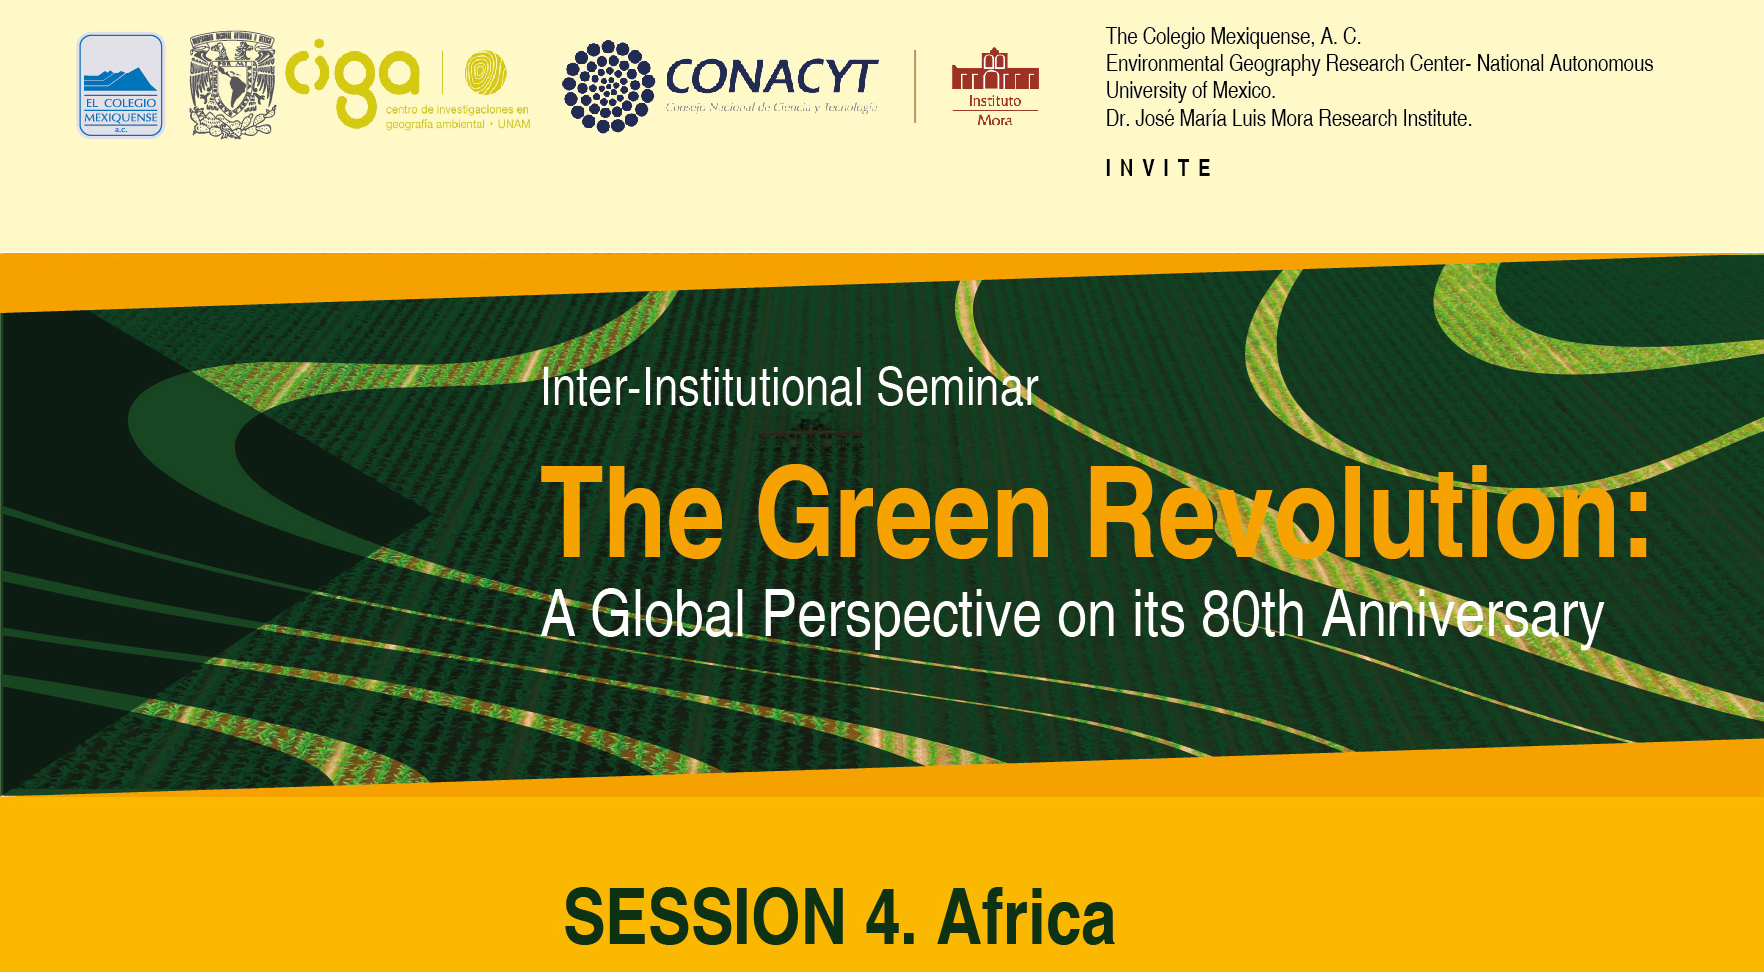 Session 4. Africa. The Green Revolution: A Global Perspective on its 80th Anniversary